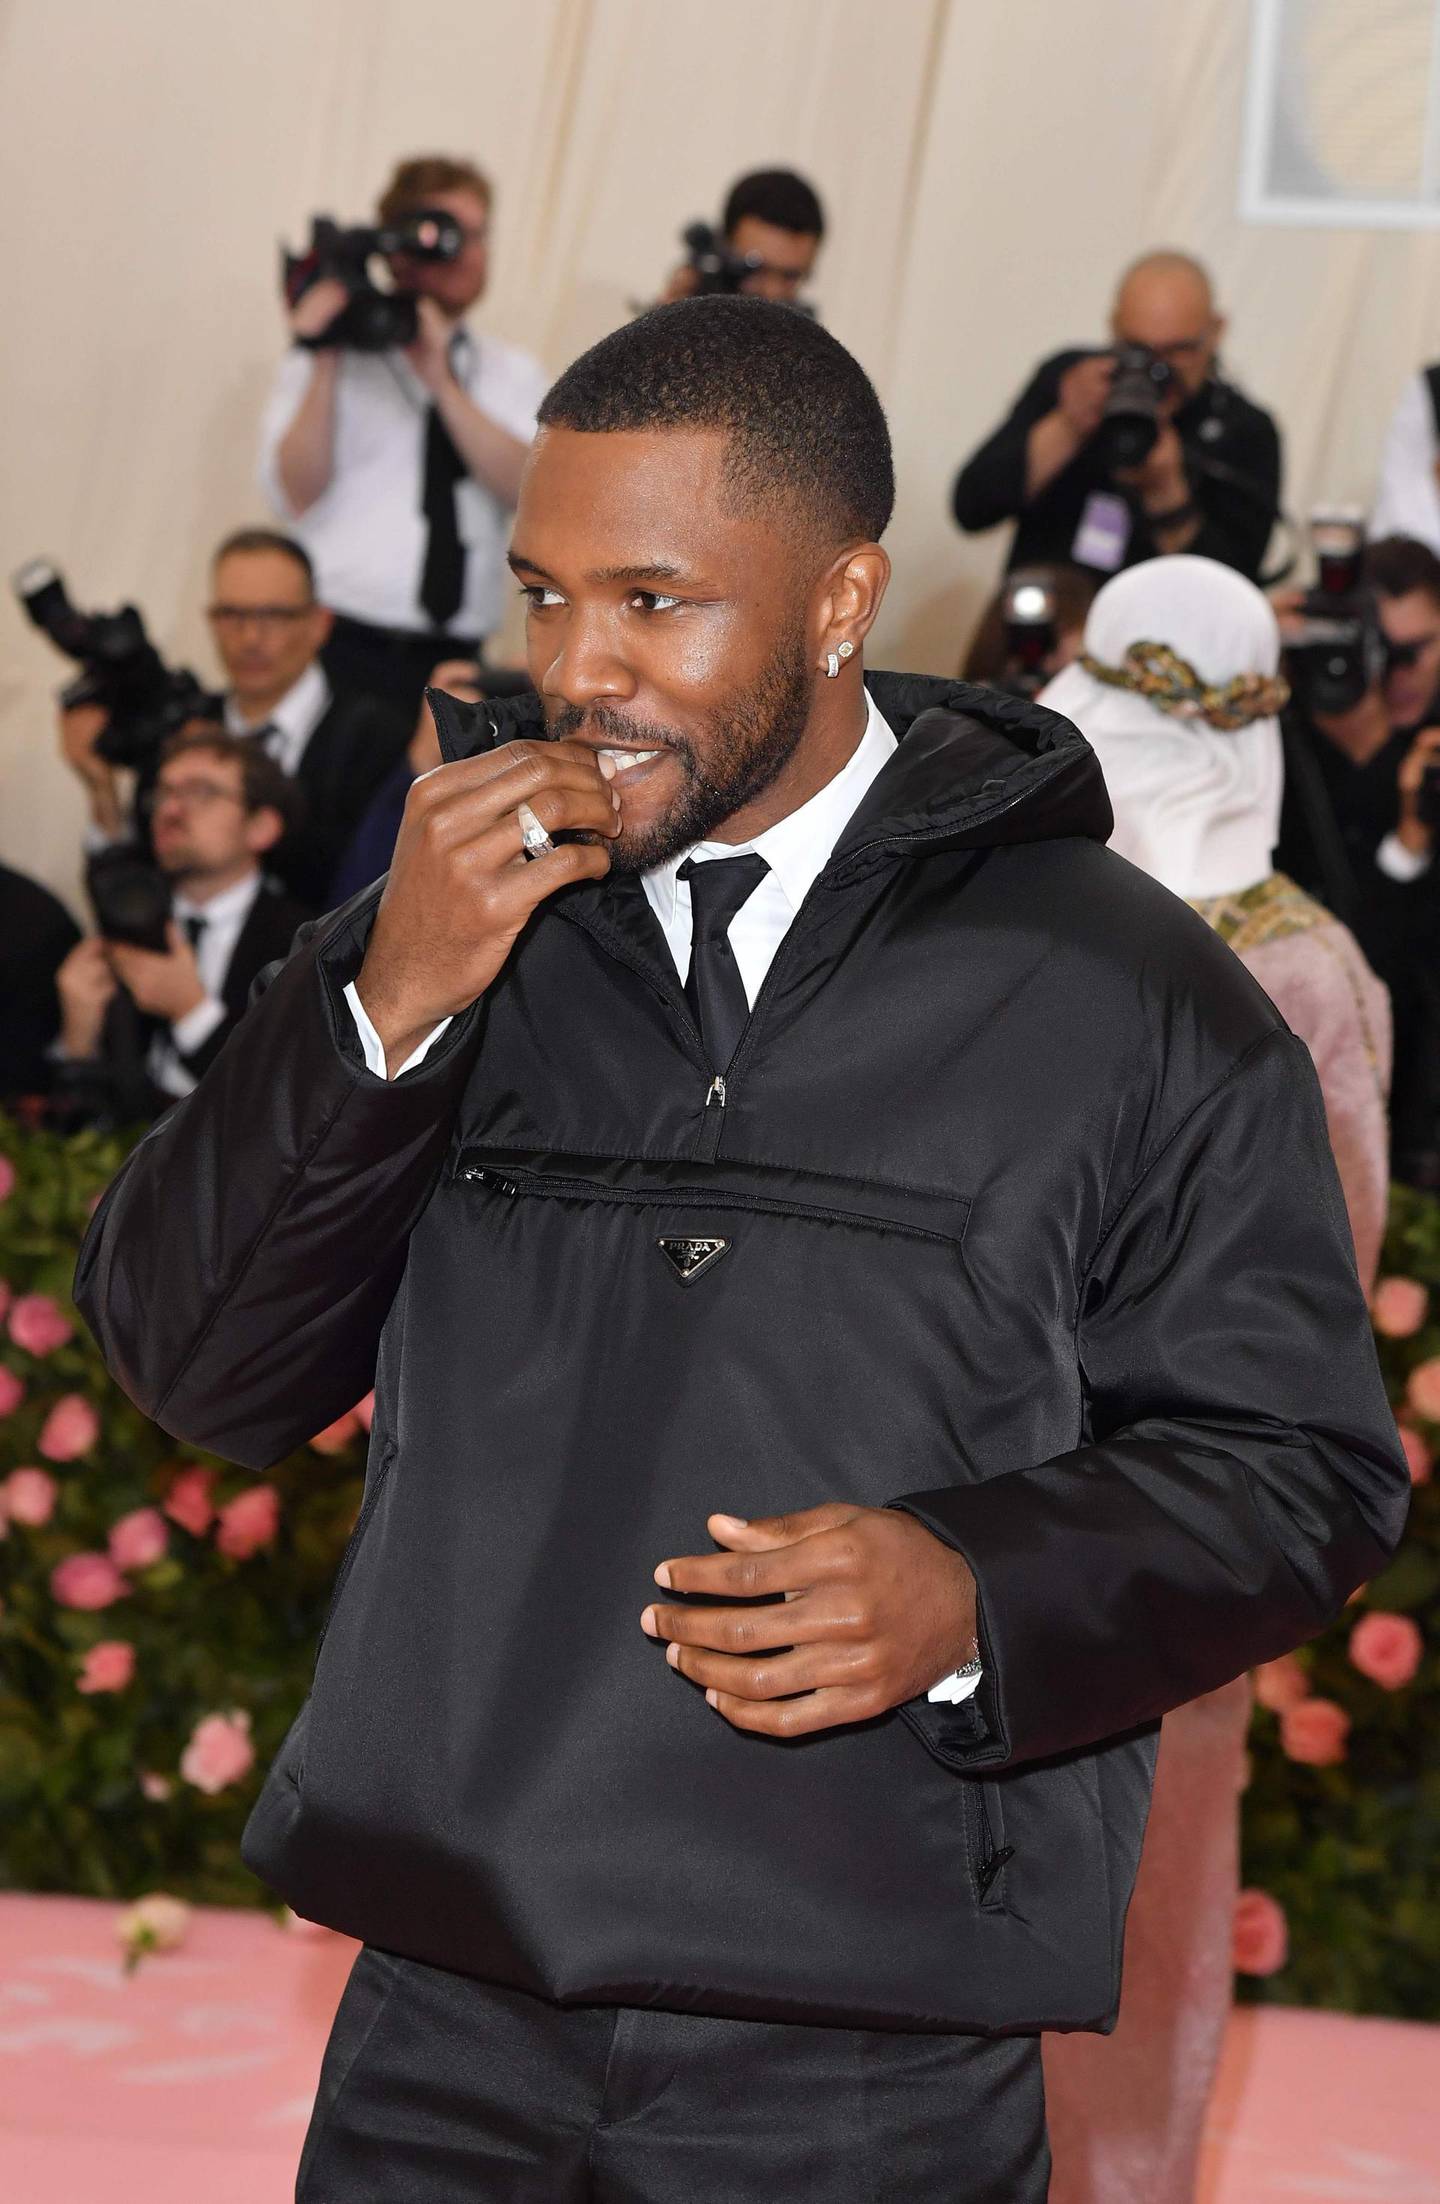 US singer-songwriter Frank Ocean arrives for the 2019 Met Gala at the Metropolitan Museum of Art on May 6, 2019, in New York. The Gala raises money for the Metropolitan Museum of Art’s Costume Institute. The Gala's 2019 theme is “Camp: Notes on Fashion" inspired by Susan Sontag's 1964 essay "Notes on Camp". / AFP / ANGELA WEISS
